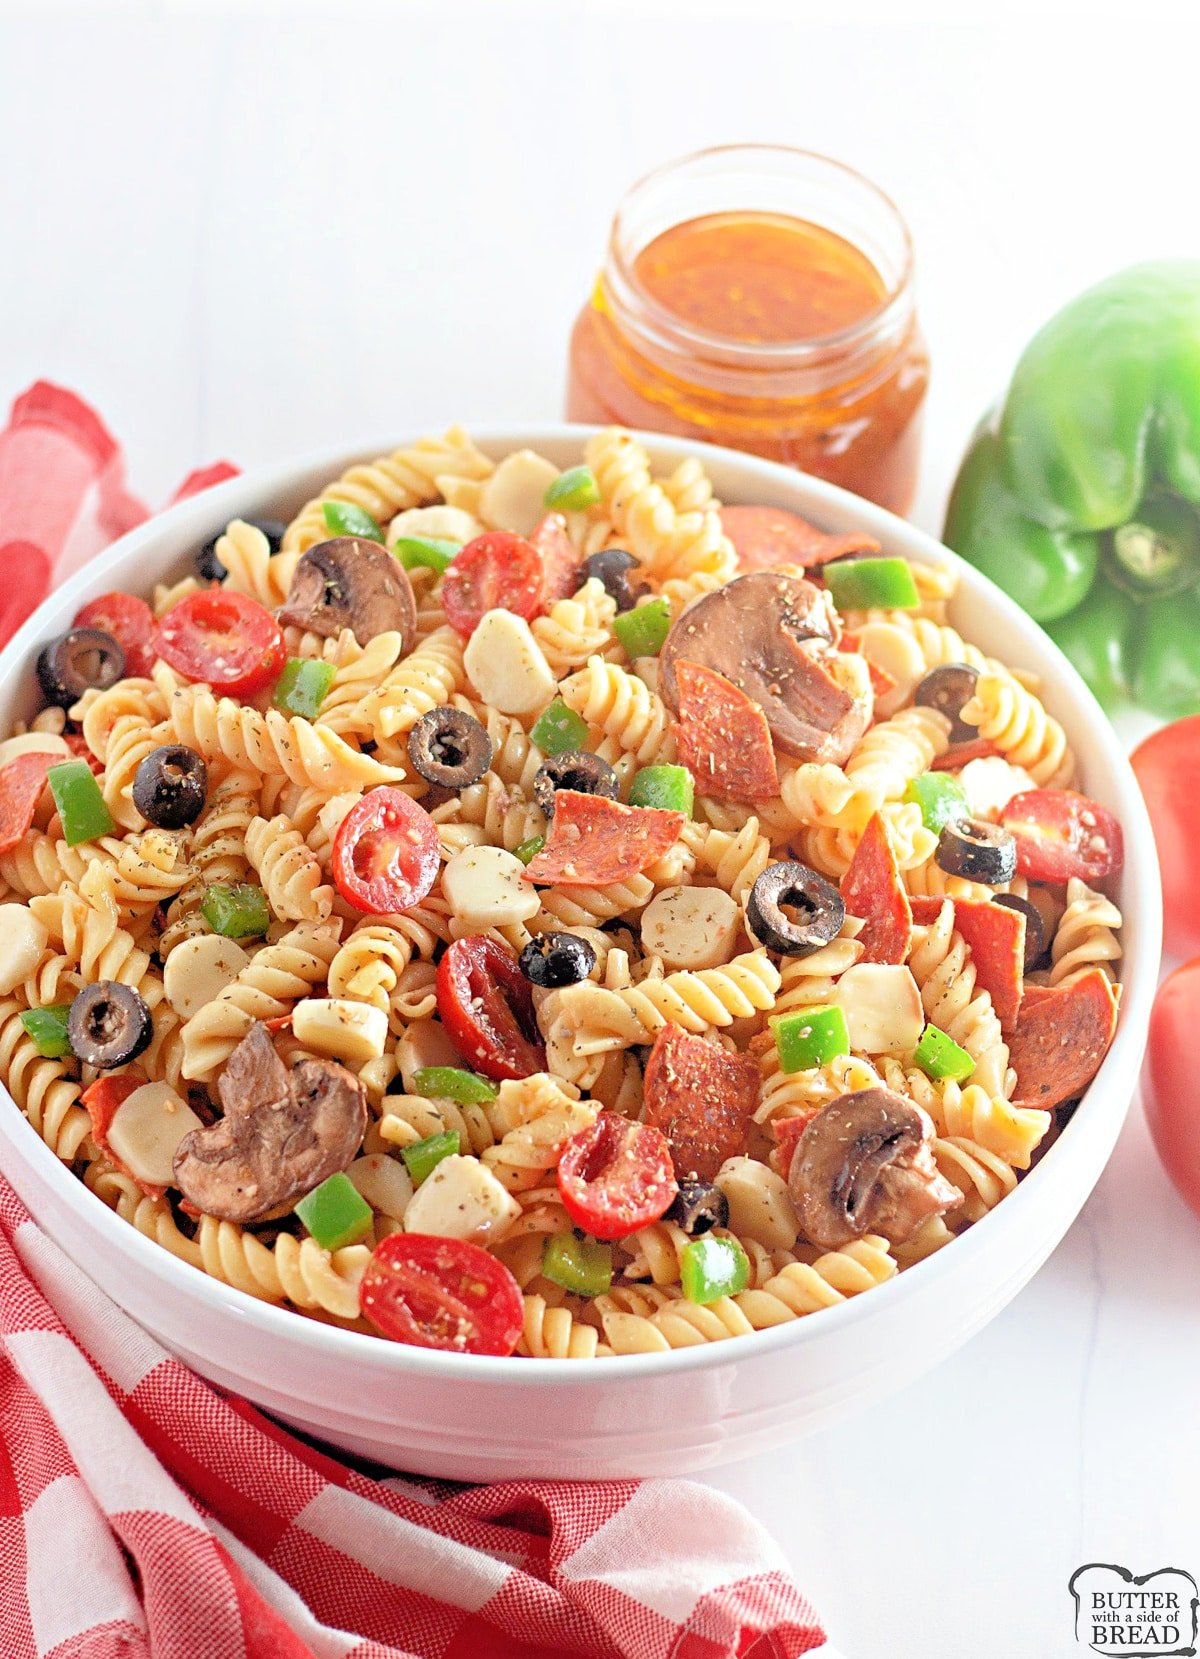 Pizza Pasta Salad is easy to make and full of pepperoni, mozzarella cheese, olives and all of your other favorite pizza toppings. This cold pasta salad recipe is perfect for parties and potlucks or even just a simple weeknight dinner. 